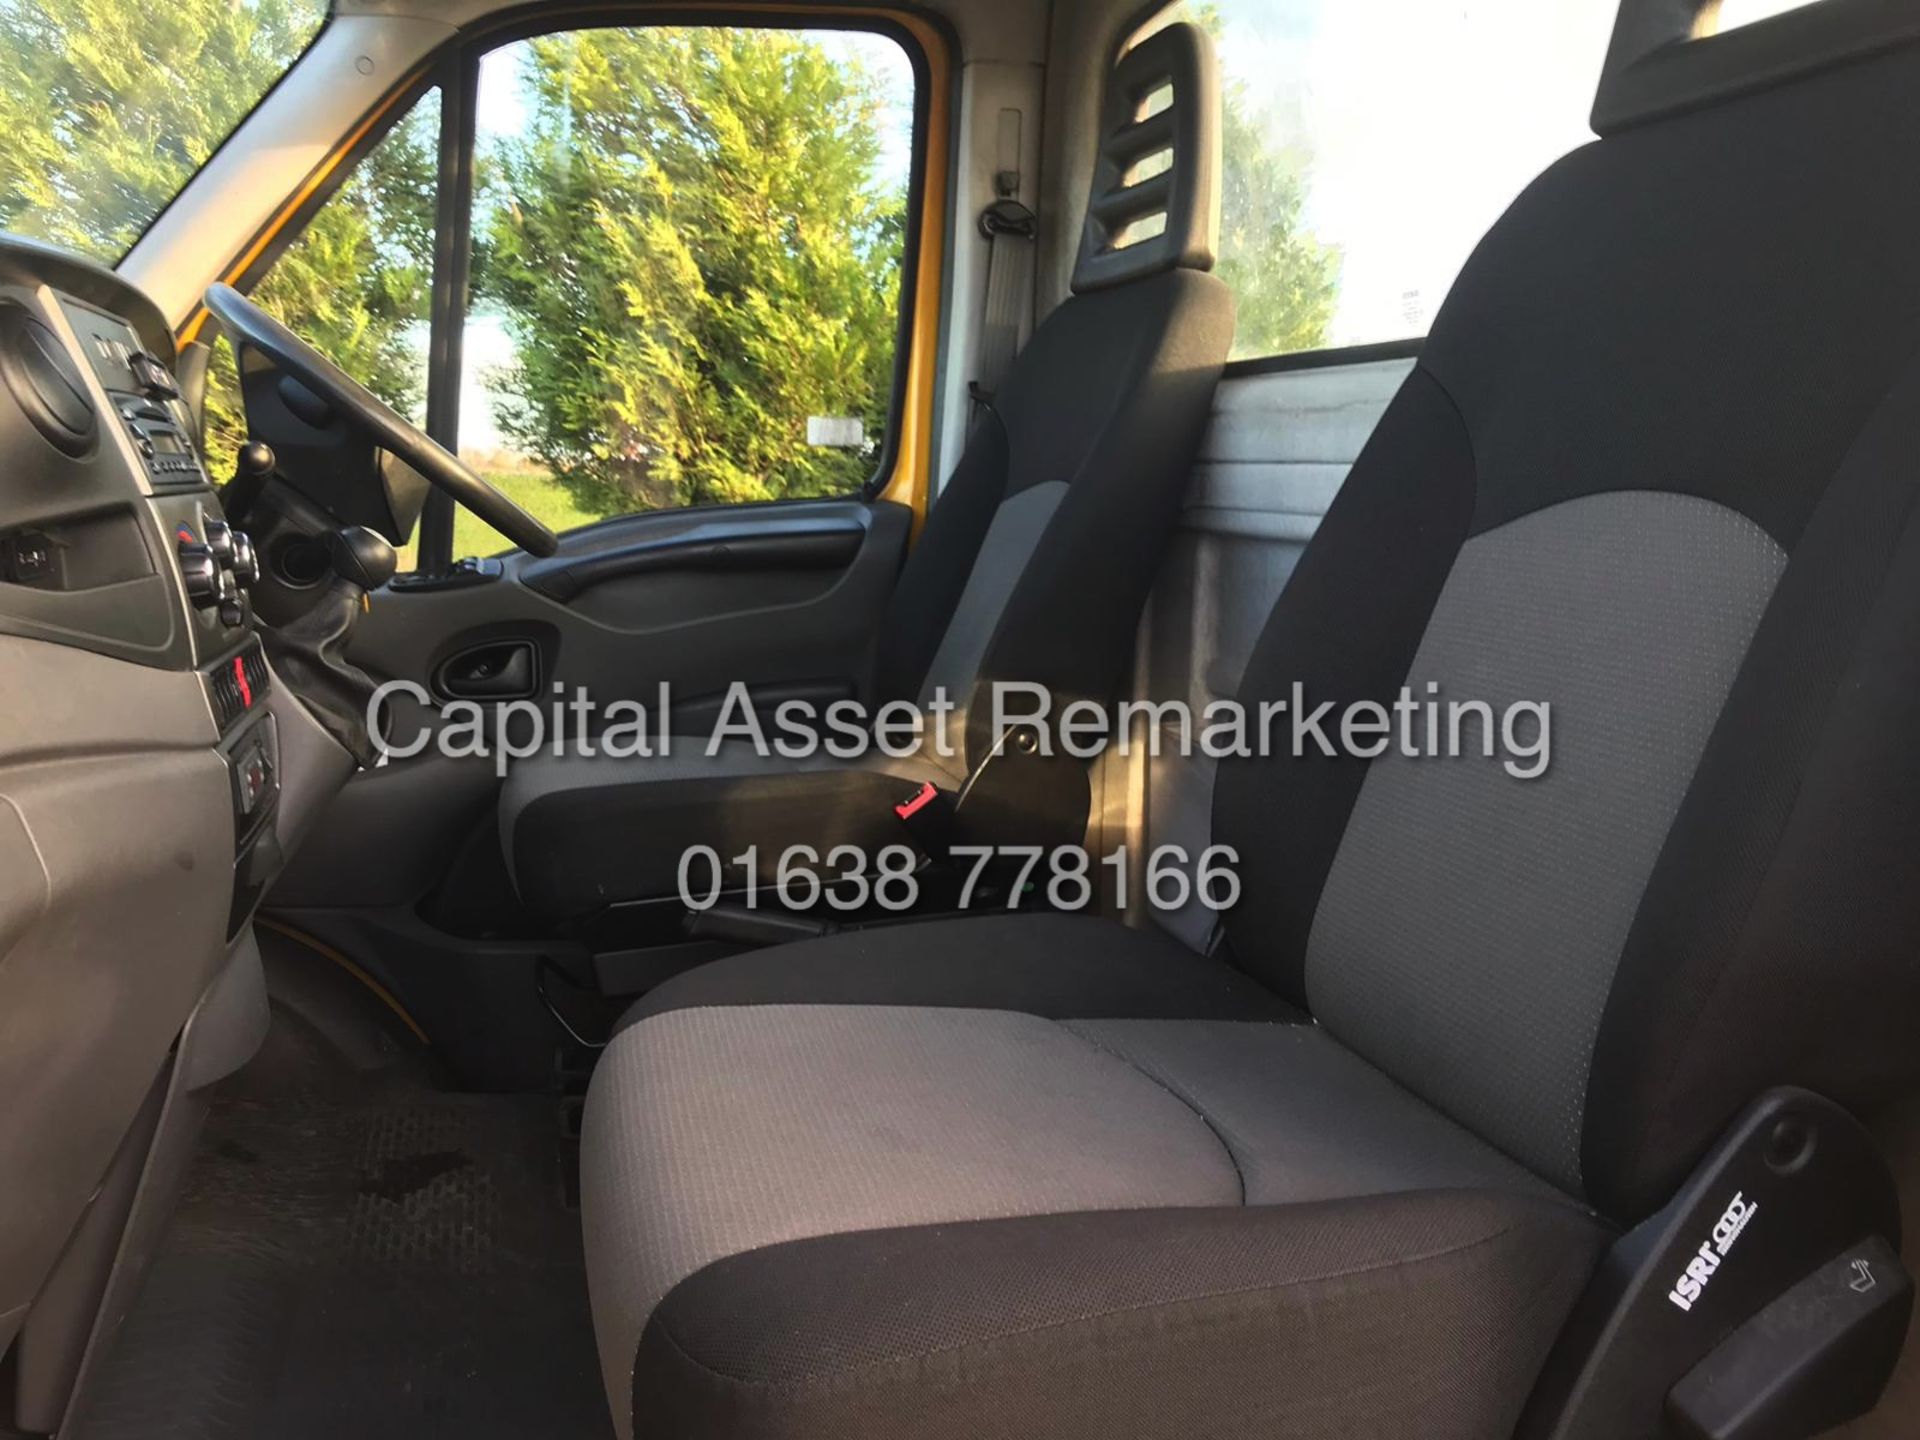 (ON SALE) IVECO DAILY 35S13 - CHASSIS CAB - NEW SHAPE - 2013 MODEL - LONG MOT - IDEAL RECOVERY TRUCK - Image 9 of 11